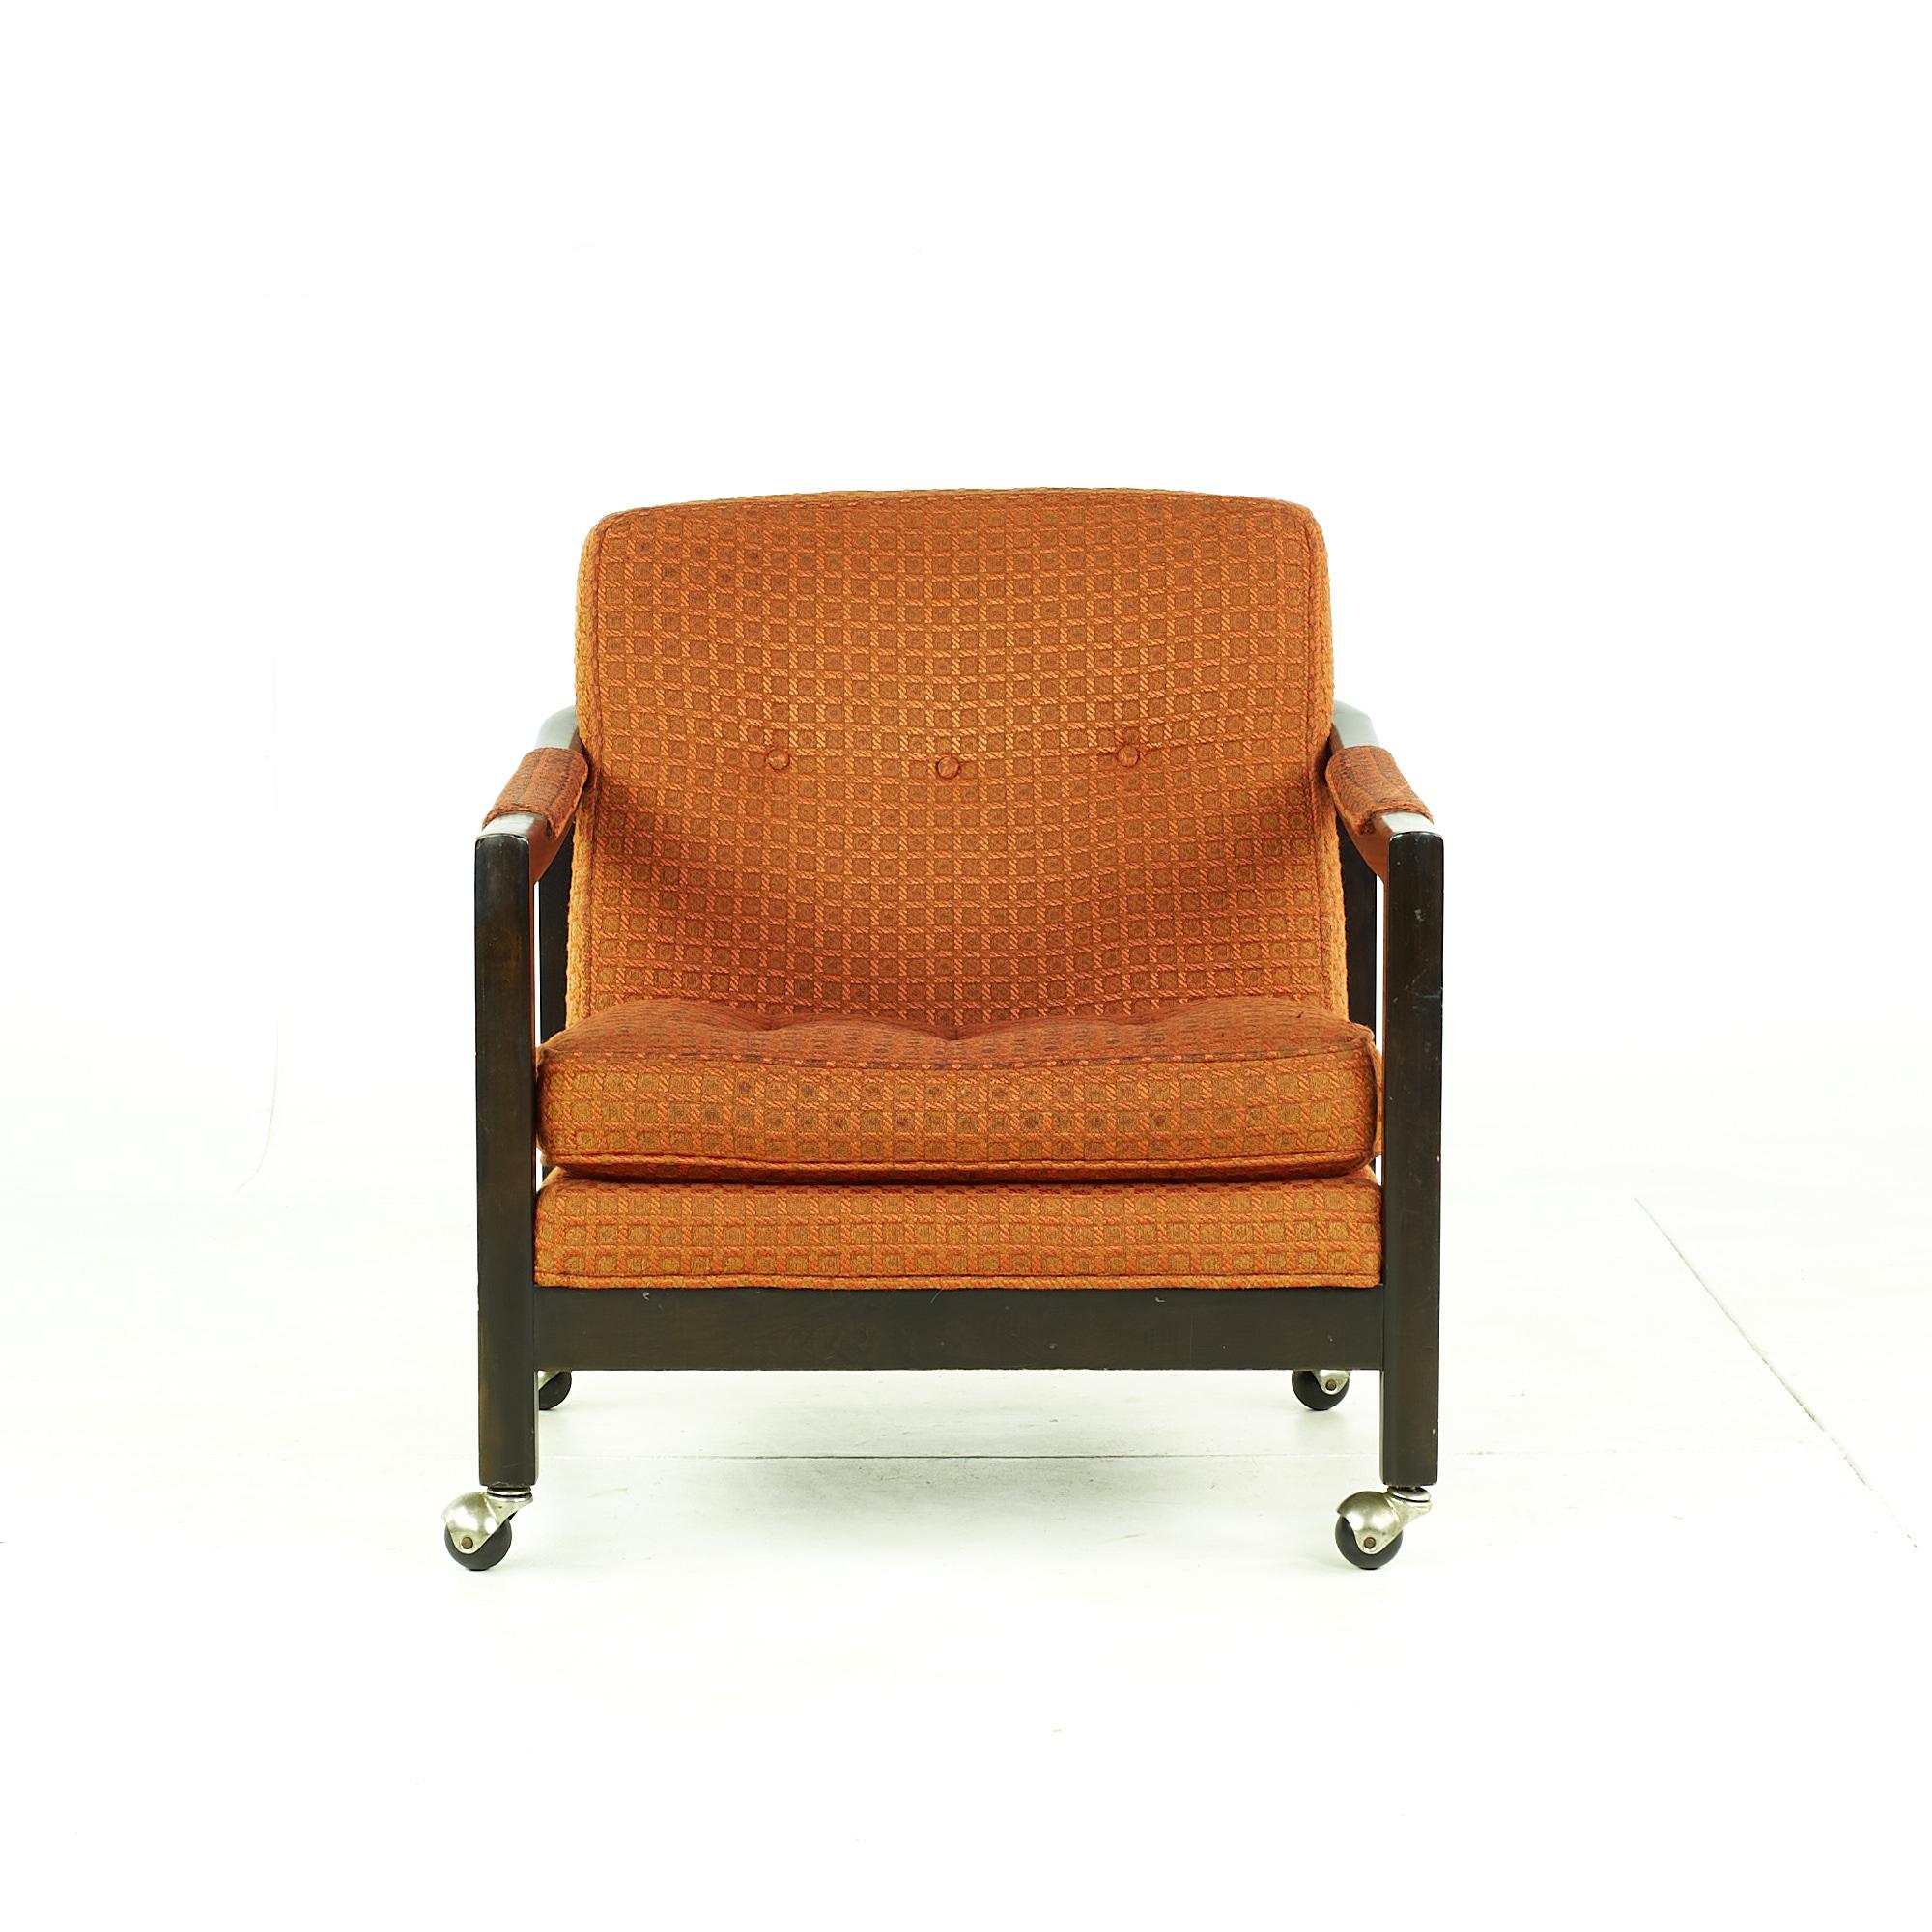 Directional mid century lounge chair with casters.

These chairs measure: 26 wide x 34 deep x 29 inches high, with a seat height of 15 and arm height/chair clearance of 21.5 inches

All pieces of furniture can be had in what we call restored